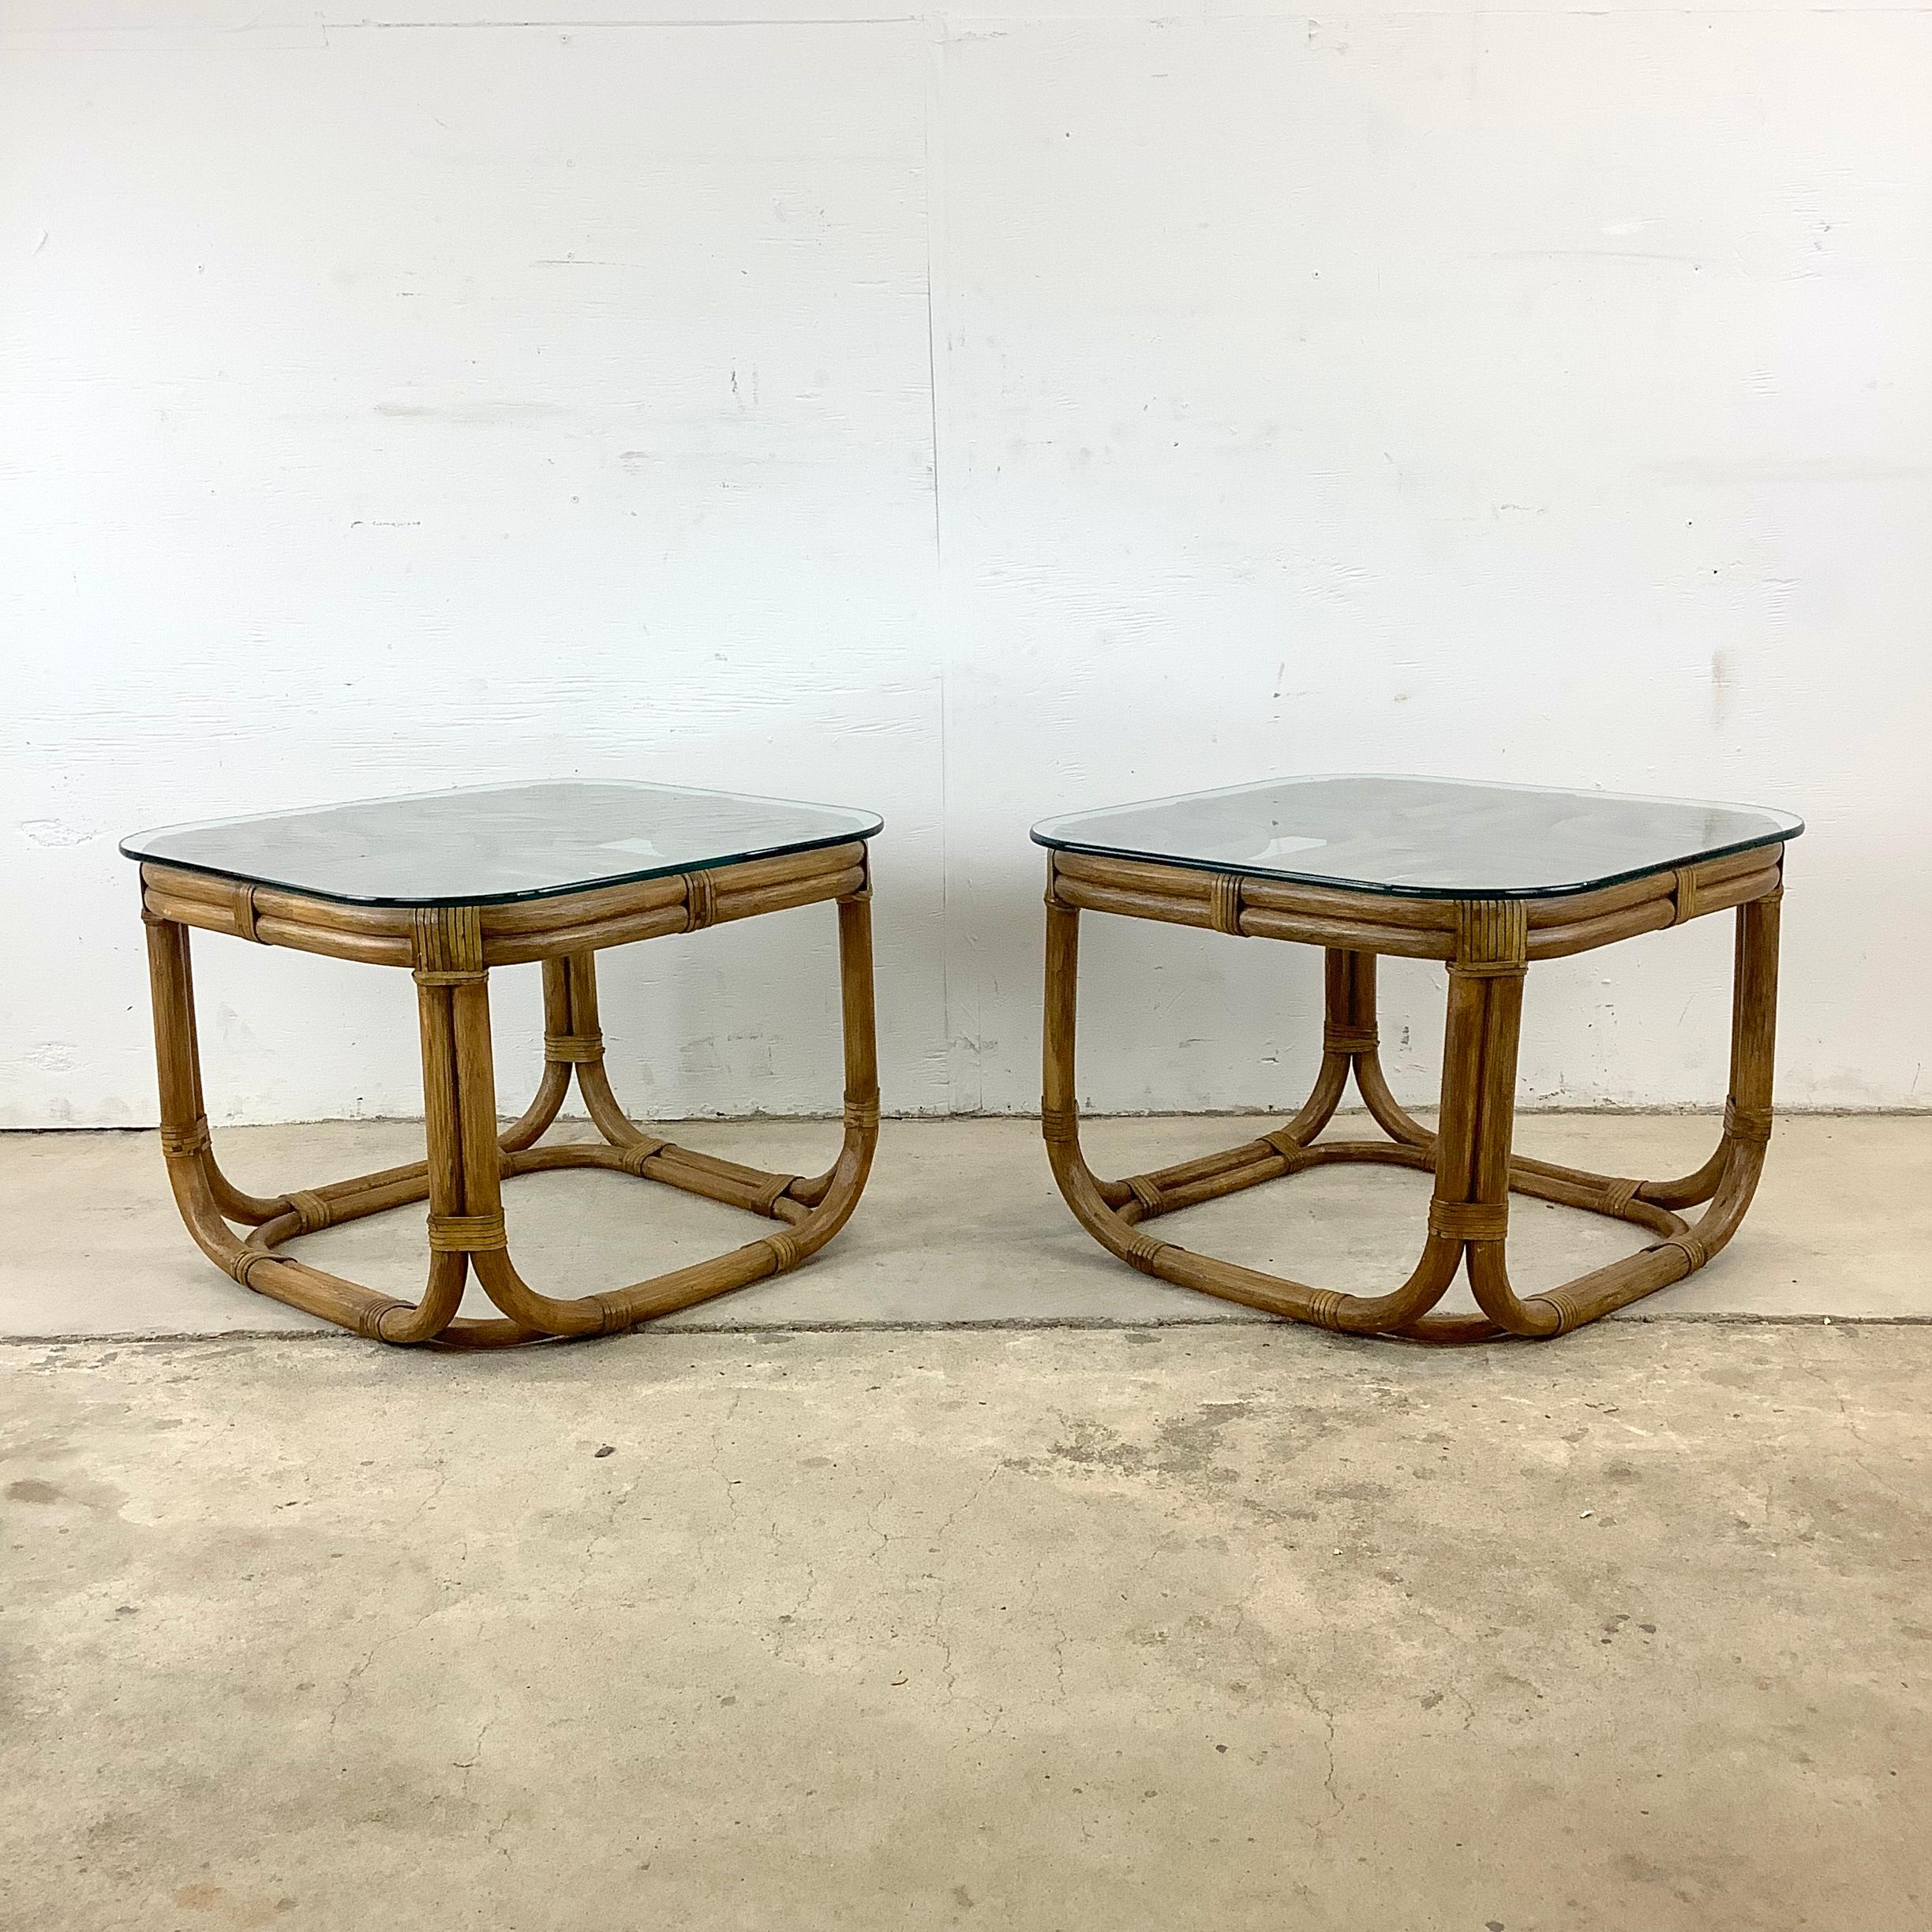 Introducing this pair of vintage square rattan side tables, each crowned with an elegant glass top. These boho chic tables are a testament to the timeless allure of coastal design and the enduring charm of rattan furniture. Perfectly suited for